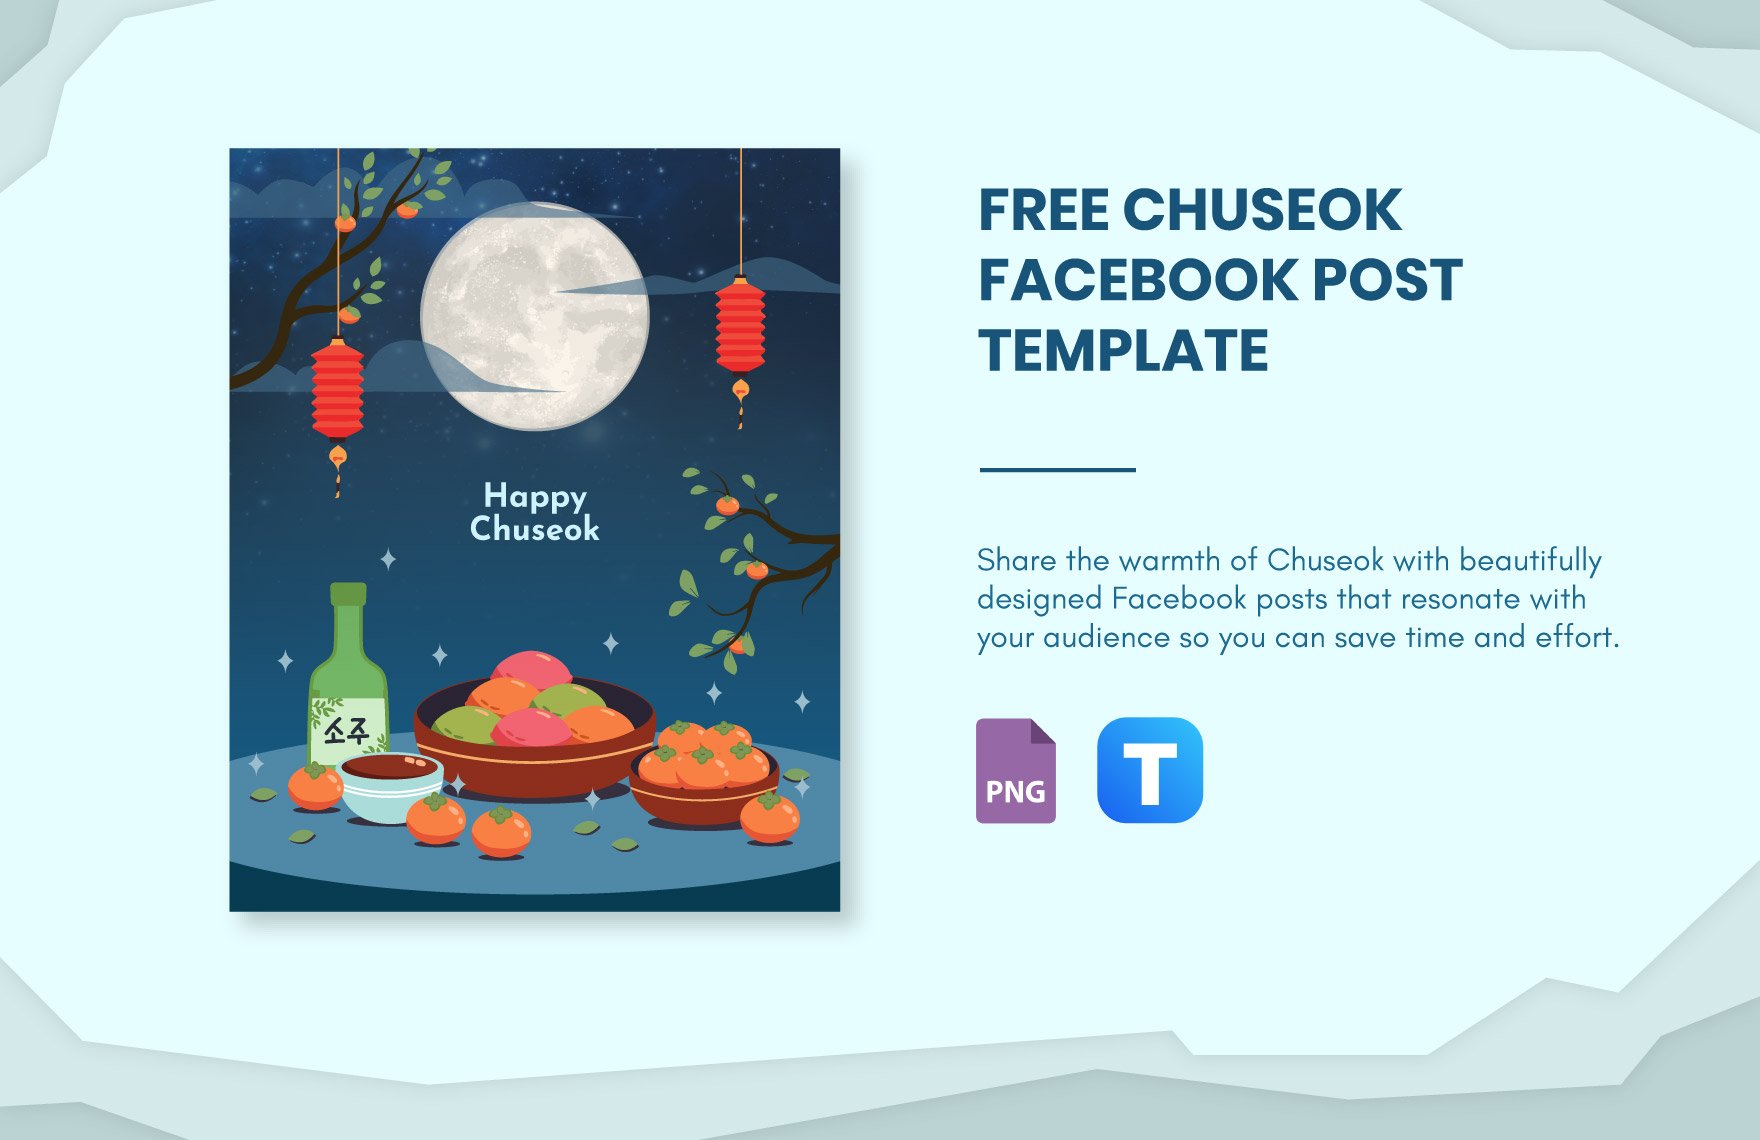 Free Chuseok Facebook Post Template in PNG